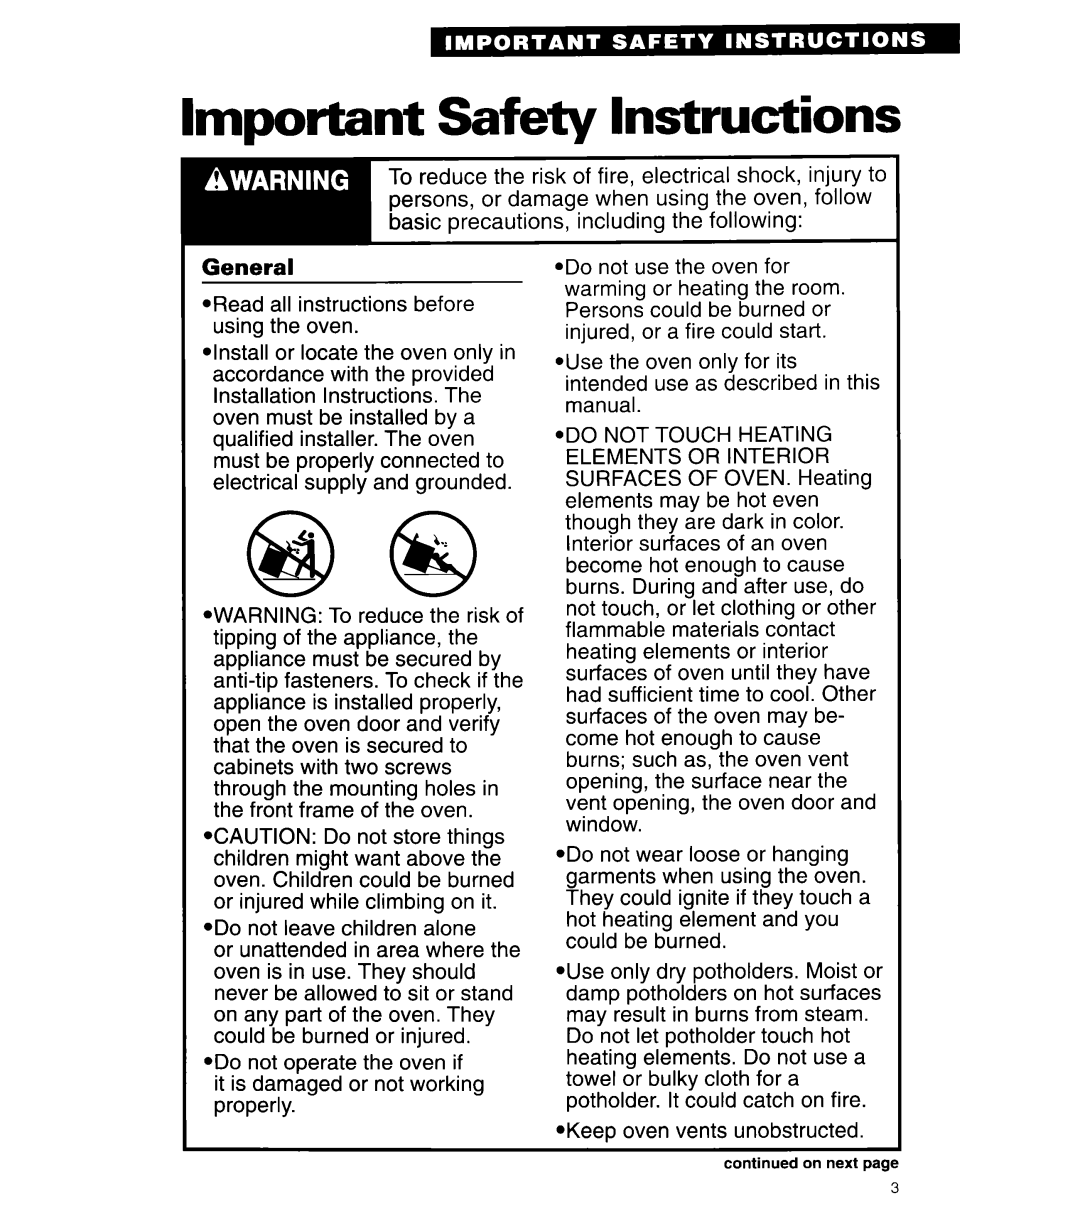 Whirlpool RB262PXA important safety instructions Important Safety Instructions, General 